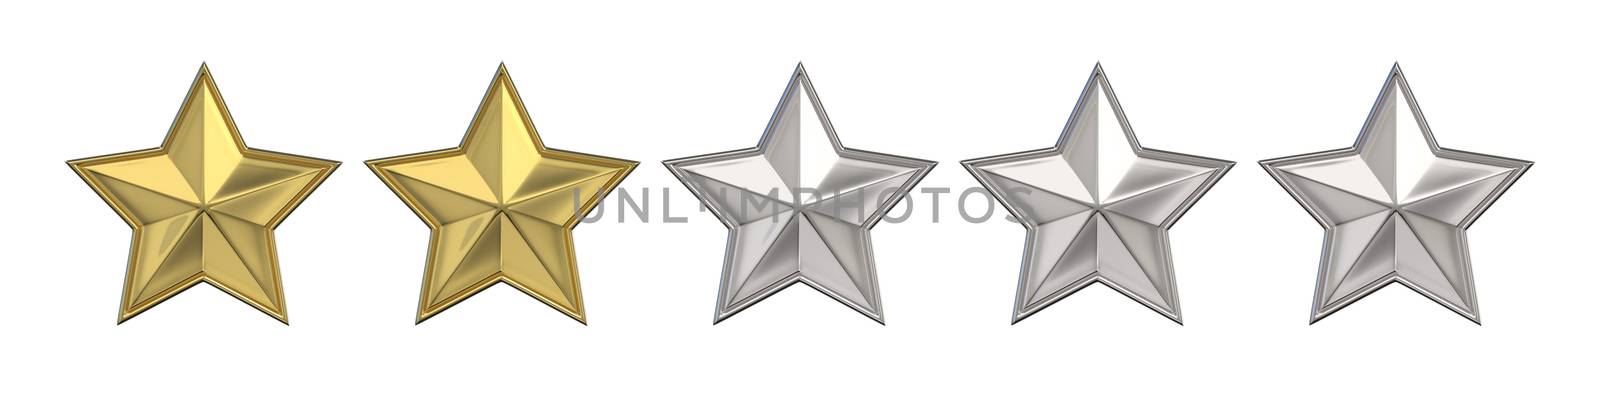 Voting concept. Rating two golden stars. 3D render illustration isolated on white background